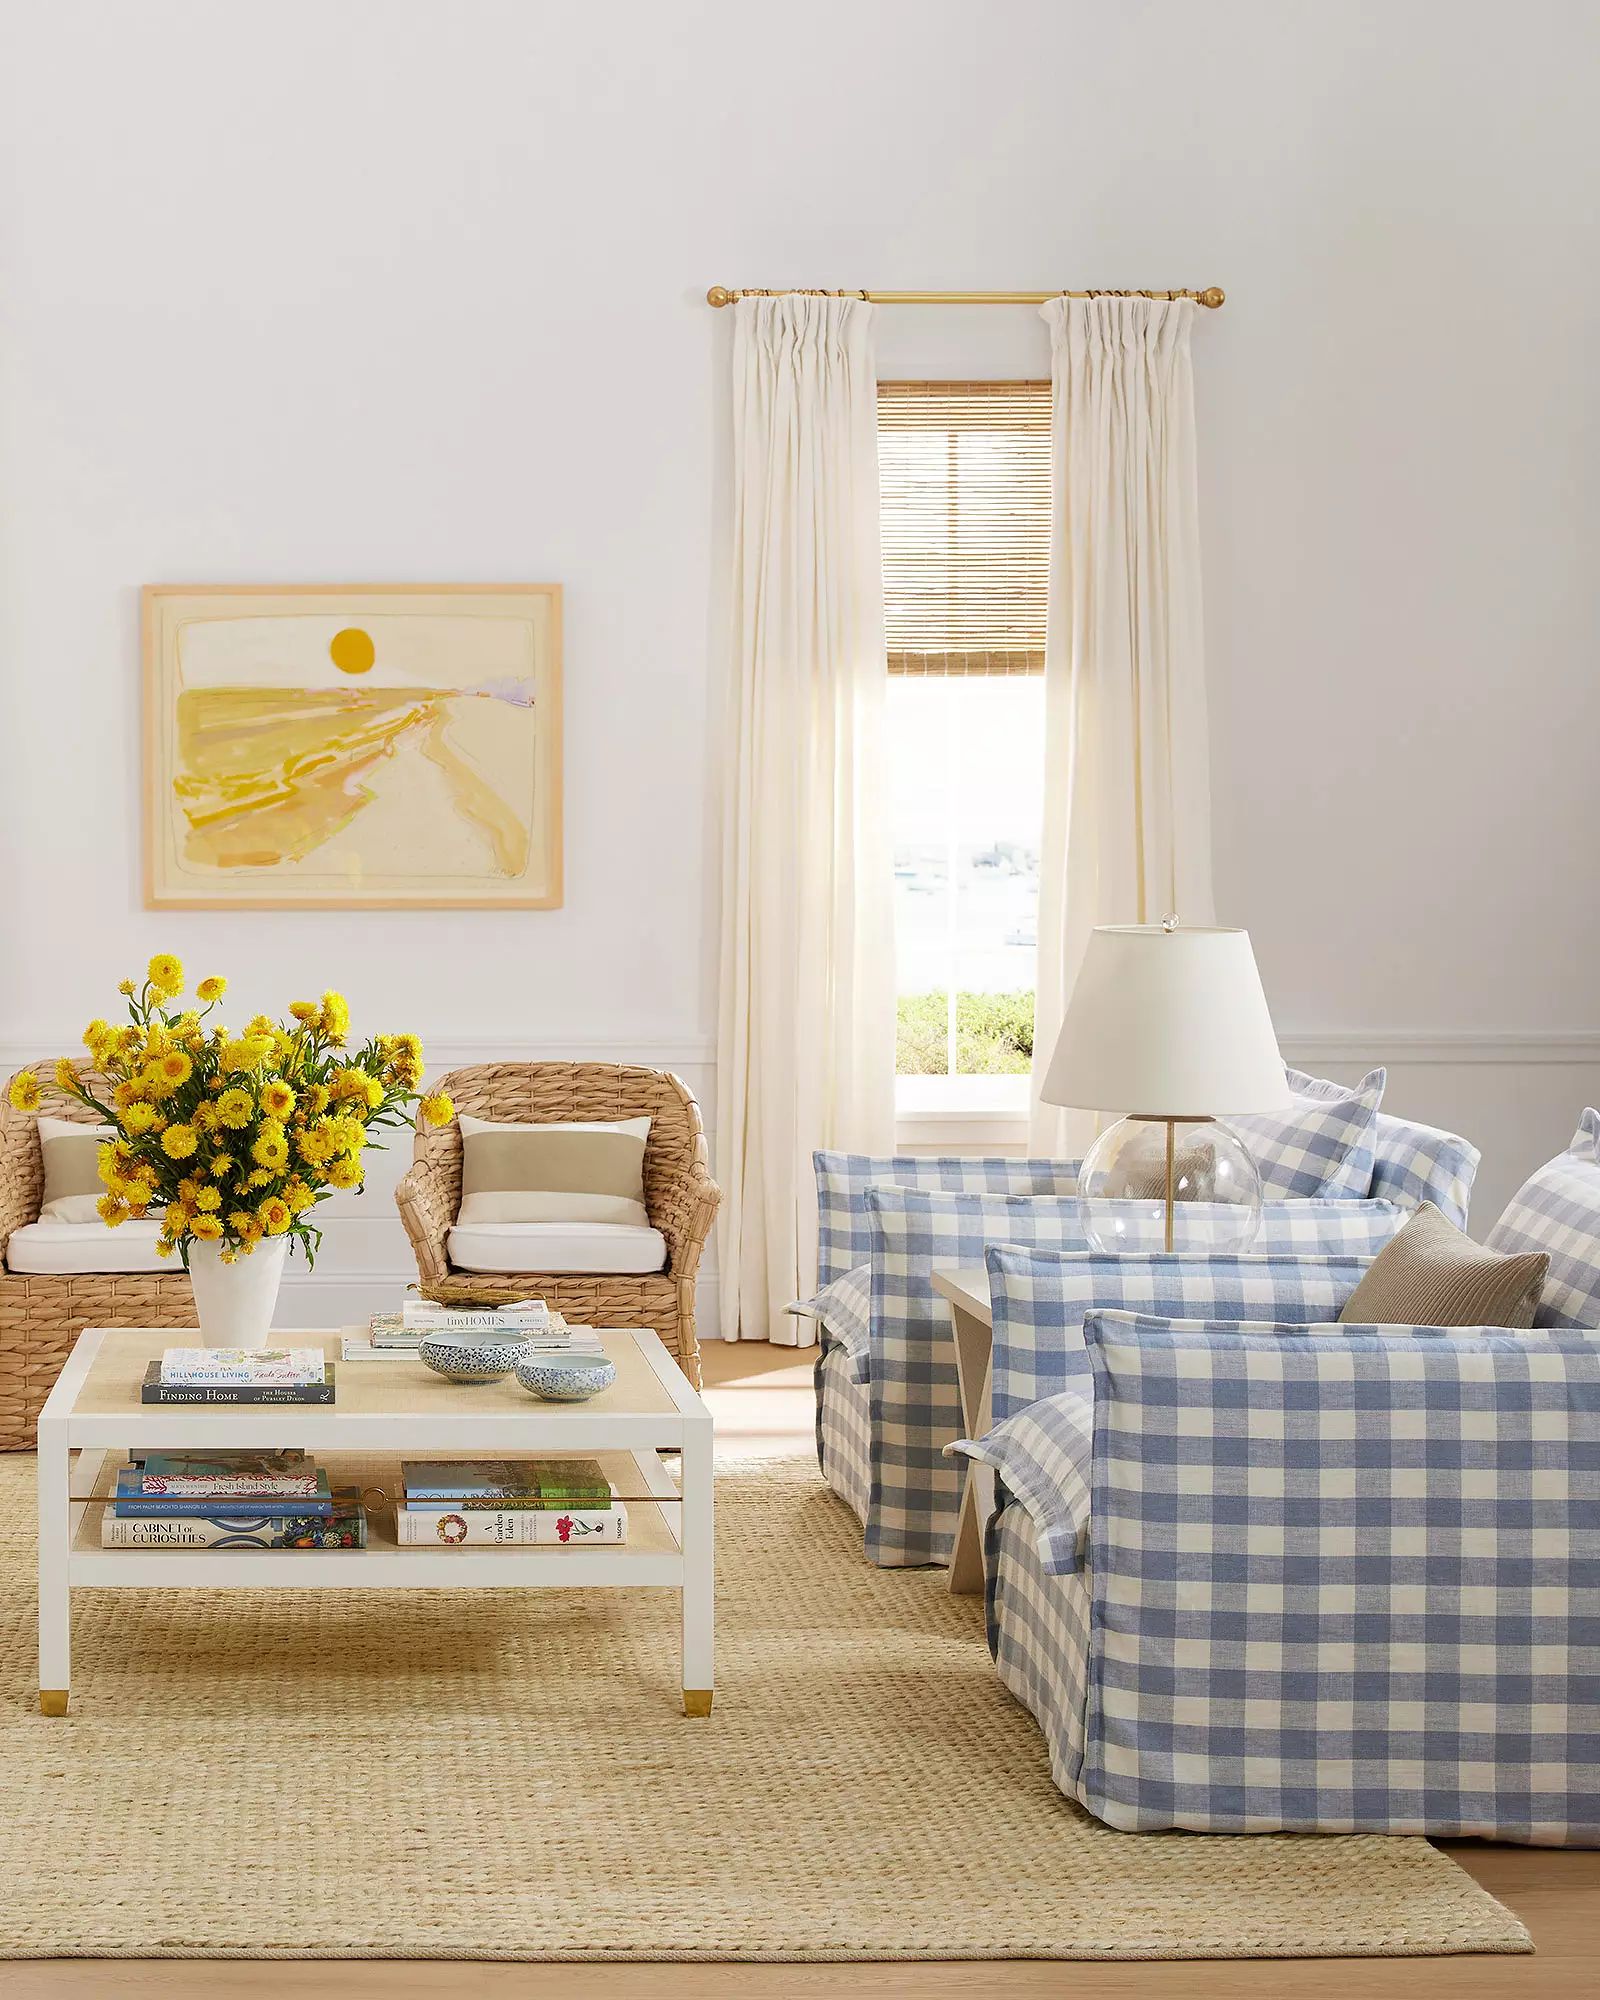 Beach House Chair - Coastal Blue Classic Gingham Linen | Serena and Lily